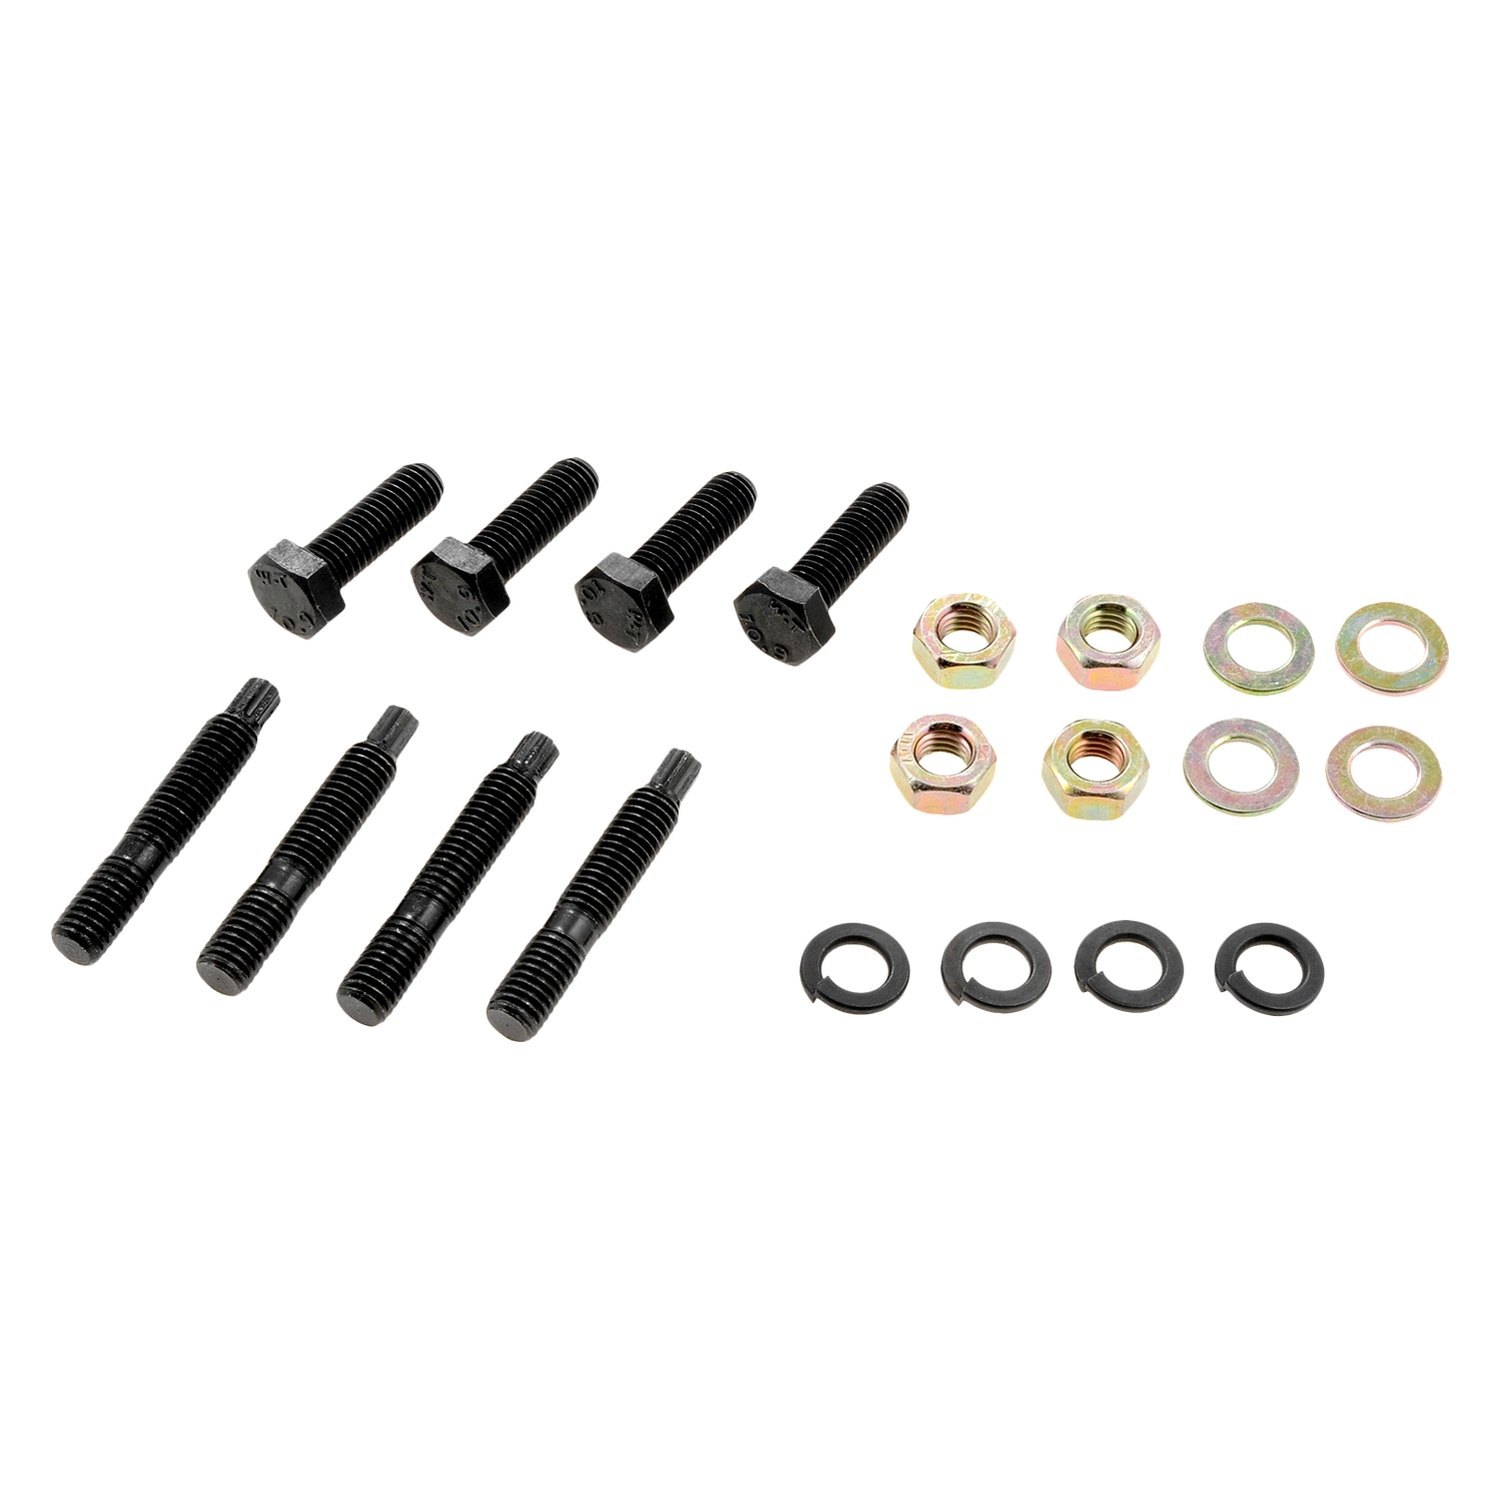 Dorman® 03404 - Metal Exhaust Manifold Studs and Nuts Kit